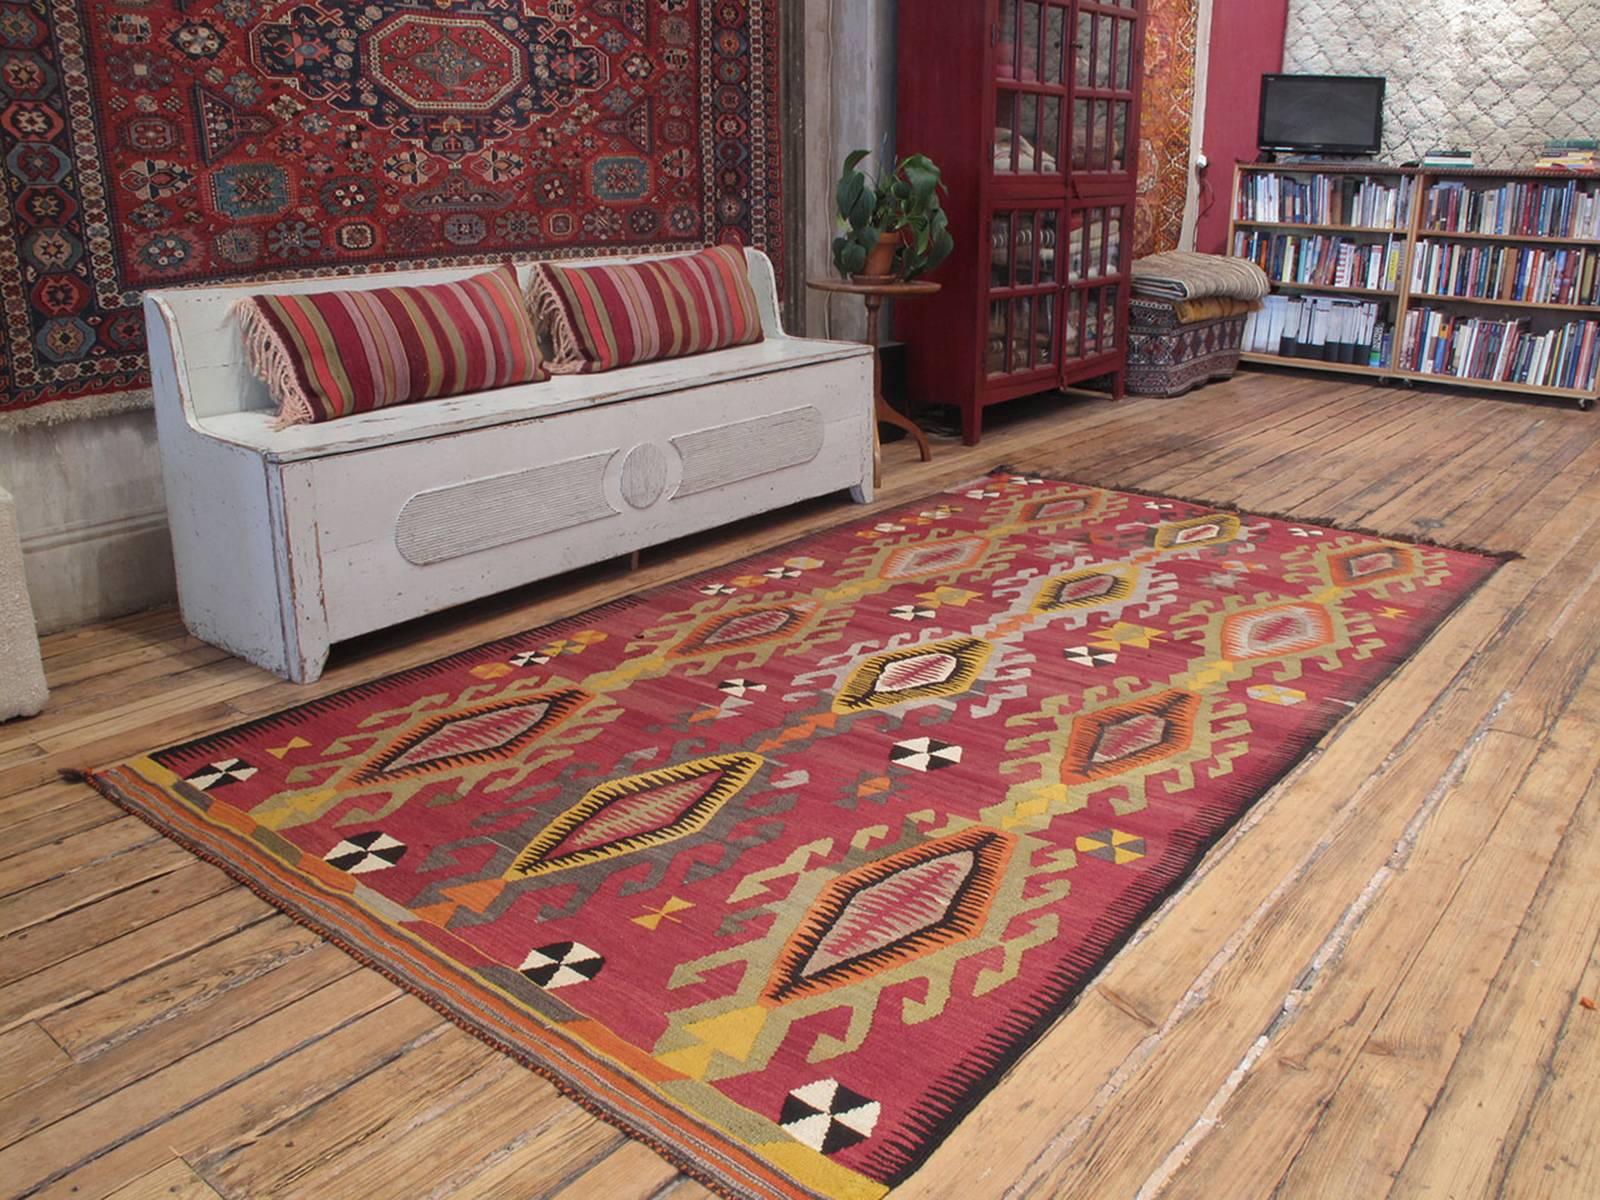 Mut Kilim rug. A great Turkish tribal Kilim rug from the region around the town of Mut in the Taurus Mountains. Rug has striking imagery and bold color palette.